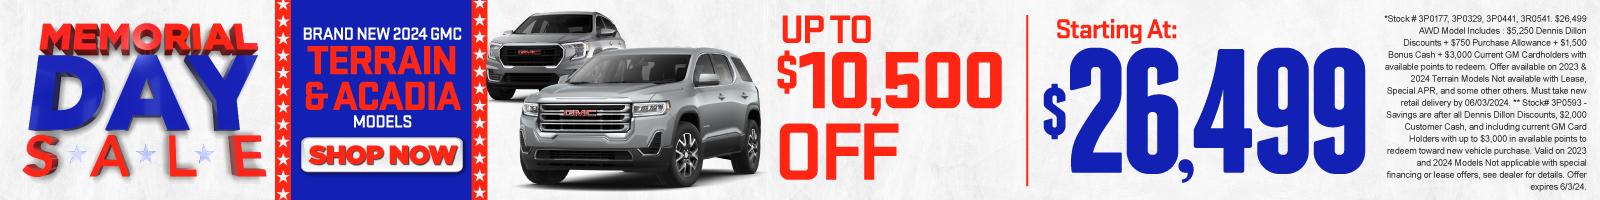 Brand New 2024 GMC Terrain and Acadia Models up to $10,500 off | Shop Now